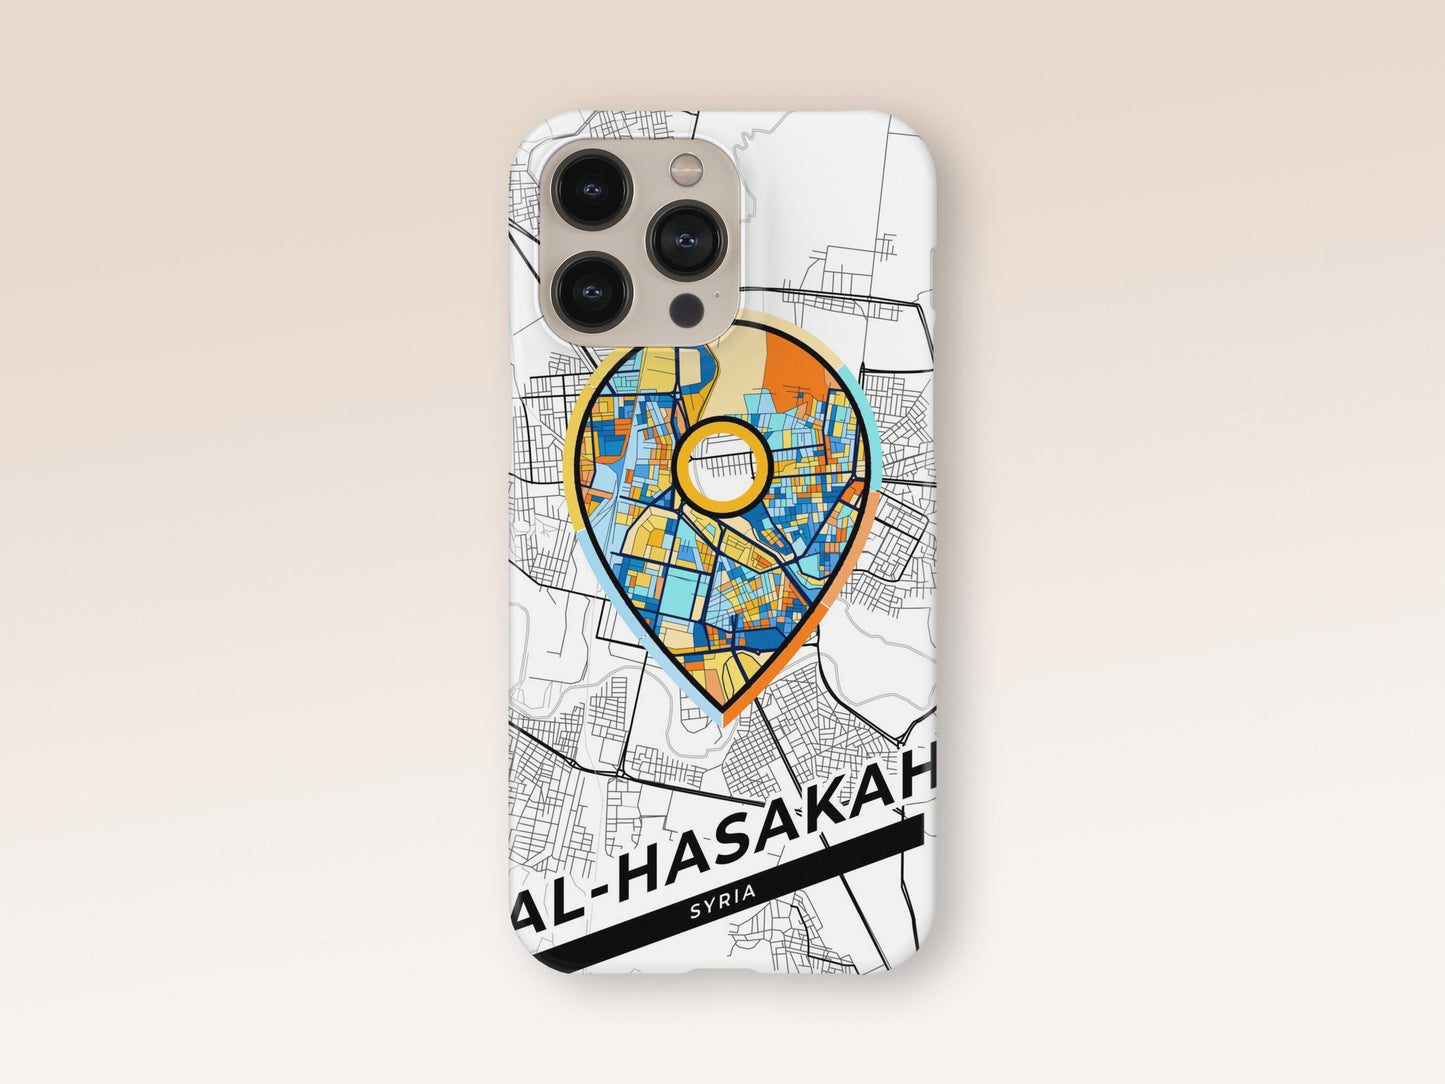 Al-Hasakah Syria slim phone case with colorful icon. Birthday, wedding or housewarming gift. Couple match cases. 1